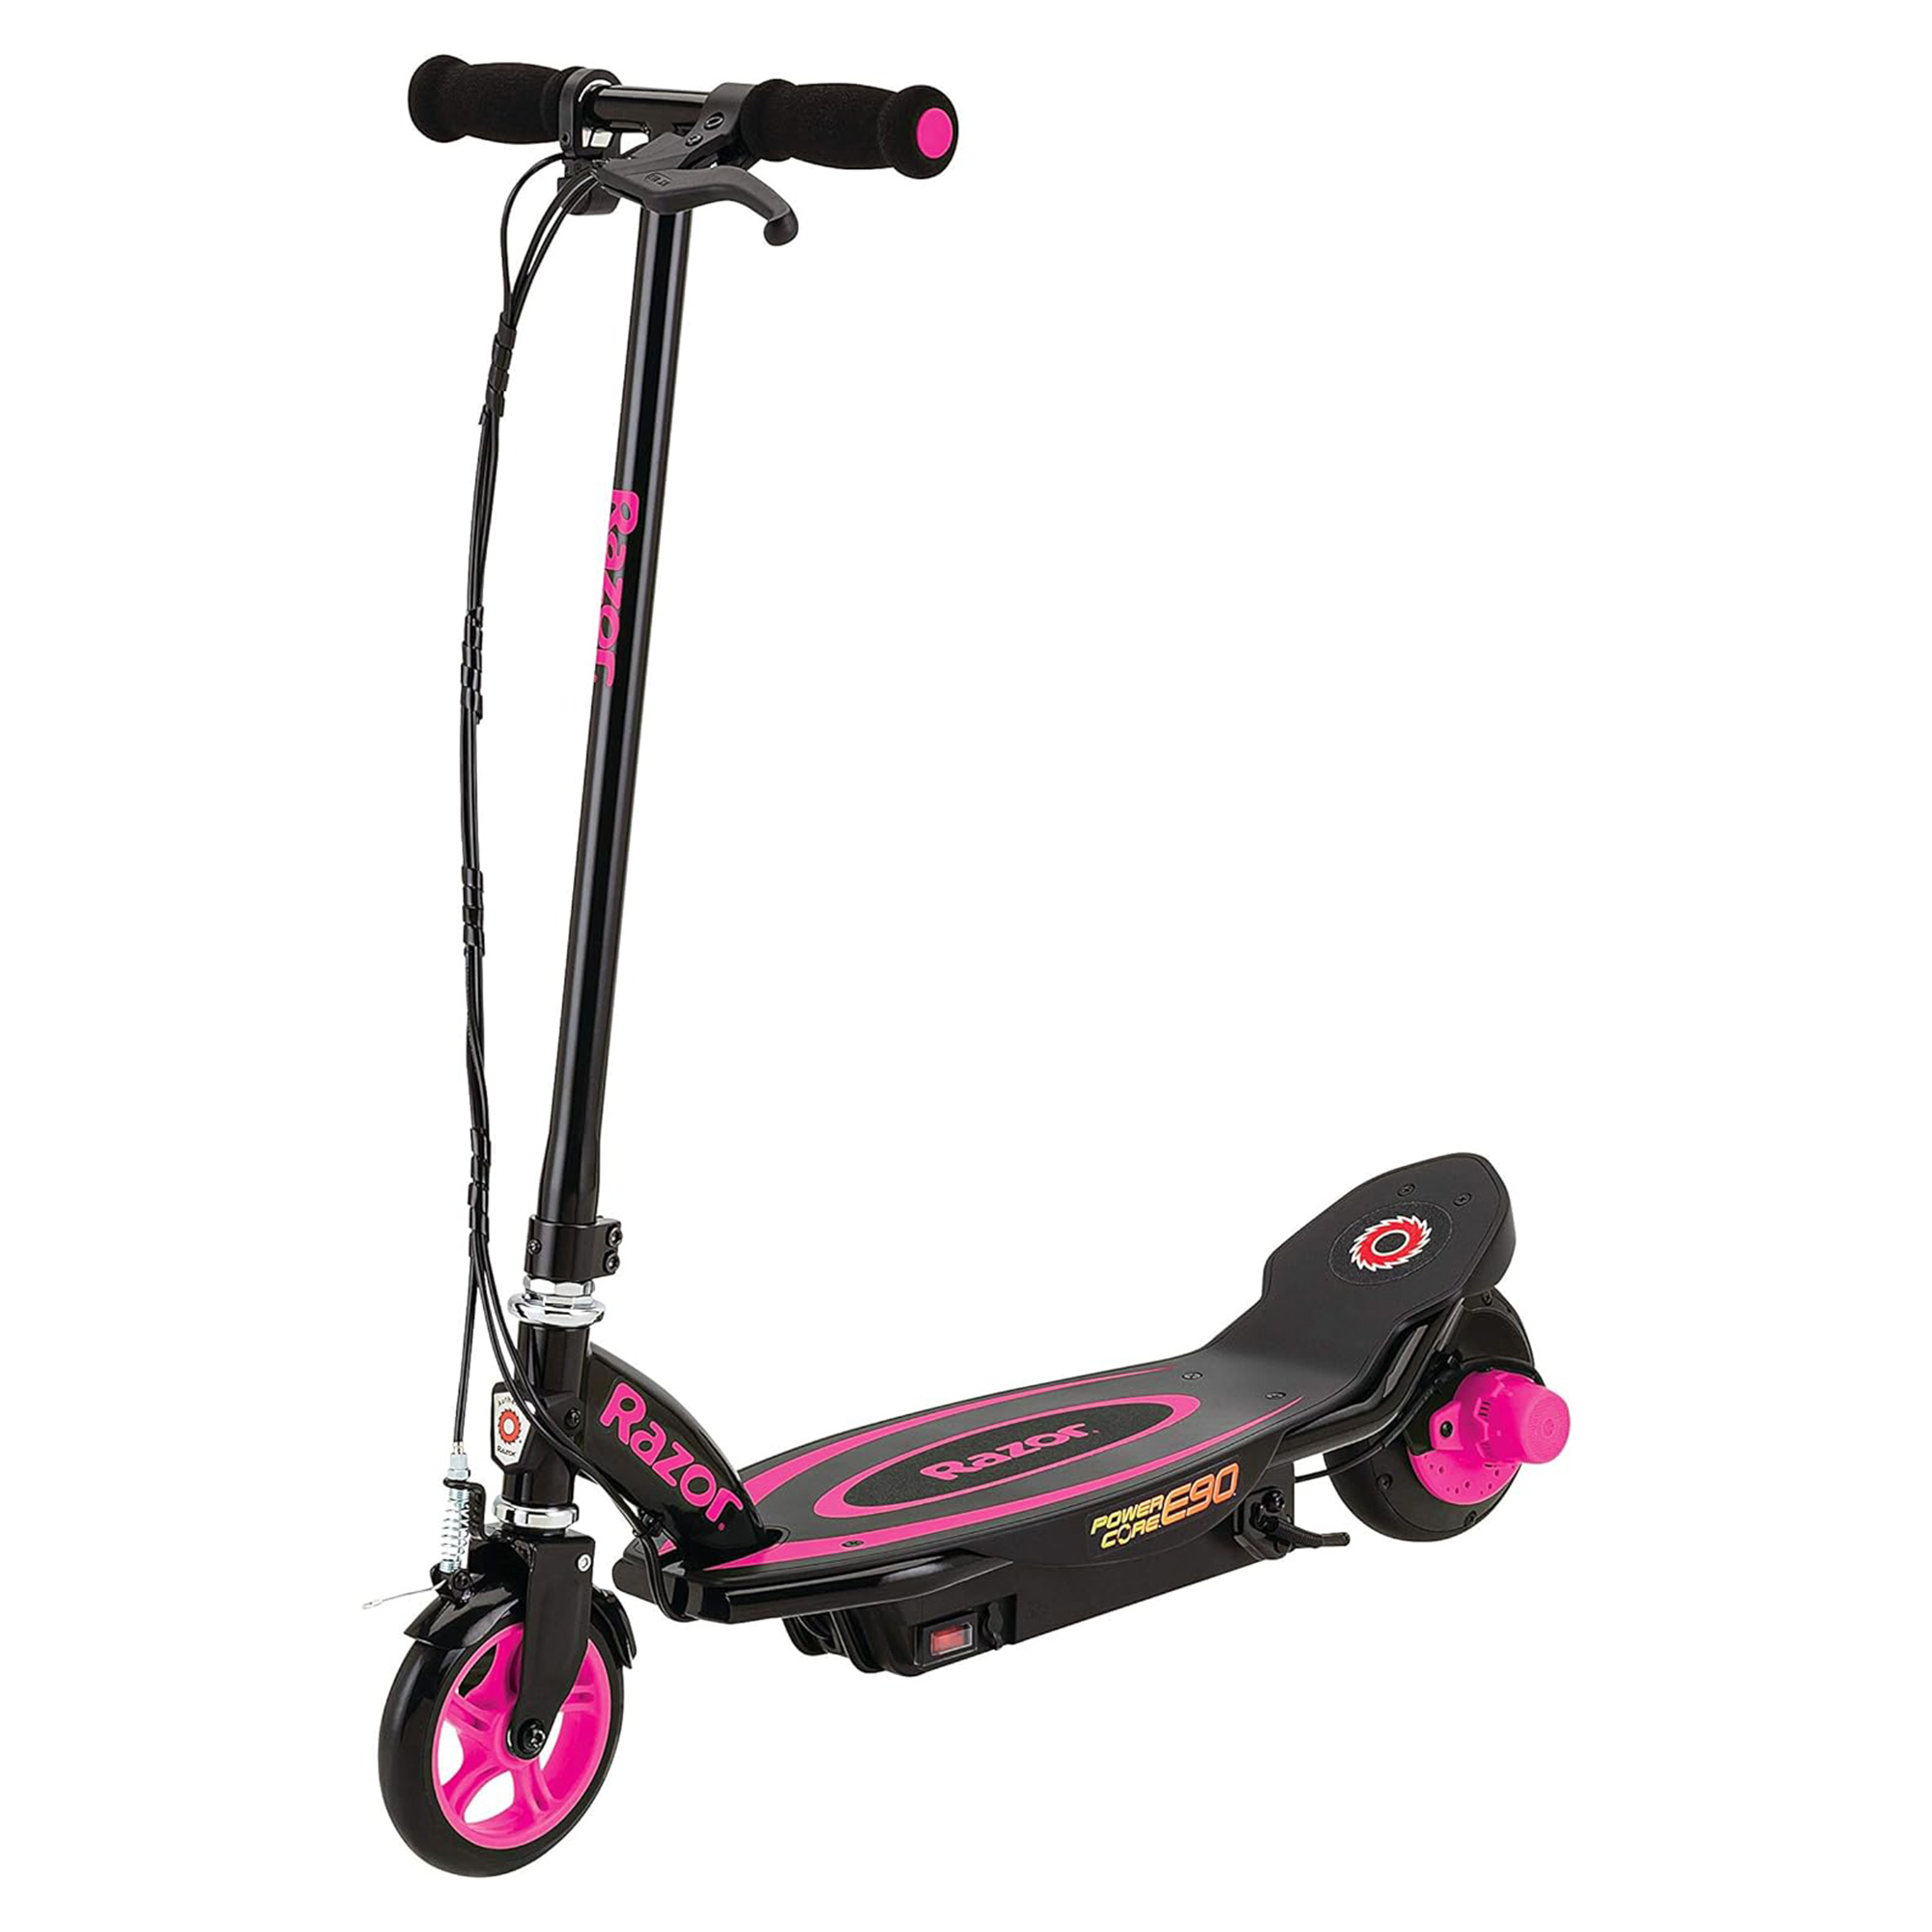 Razor Power Core E90 Sleek Electric Scooter w/Push Button Throttle, Pink - image 1 of 10